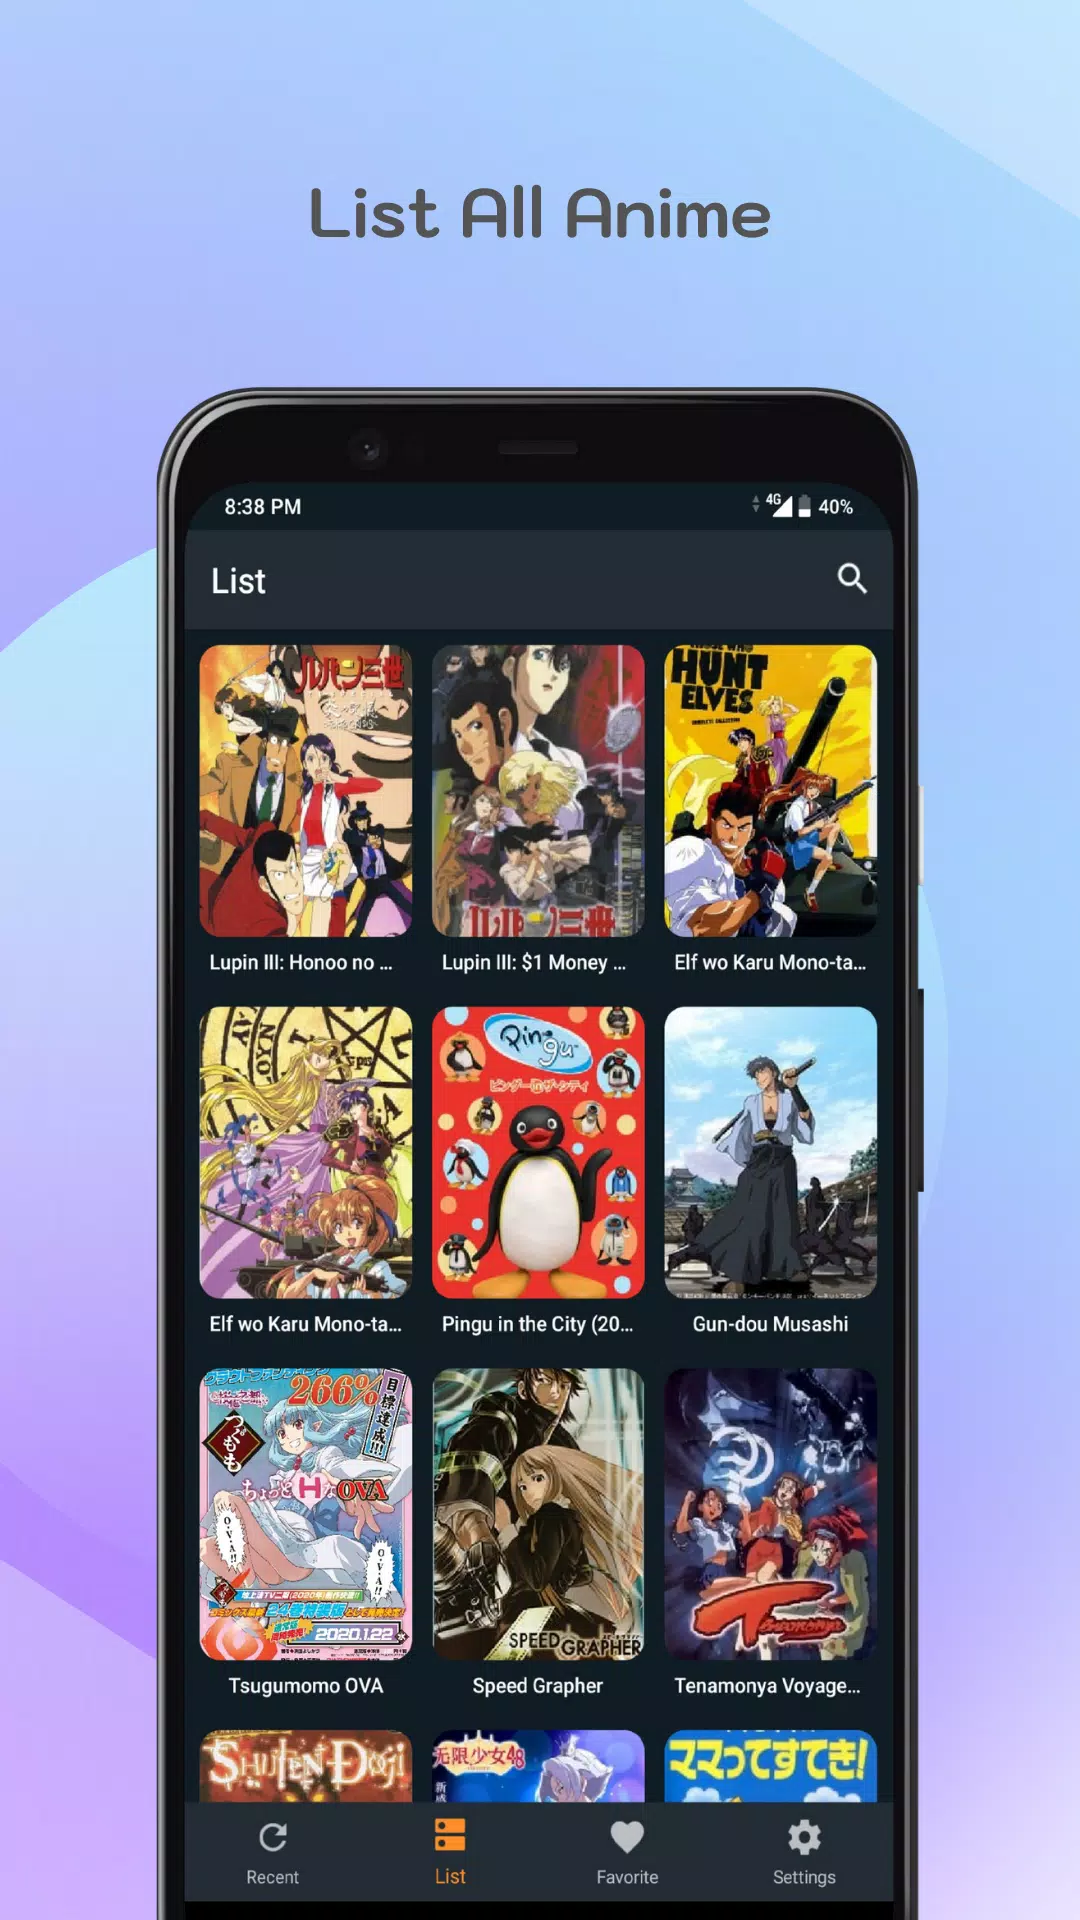 pandanime - watch anime online free APK (Android App) - Free Download